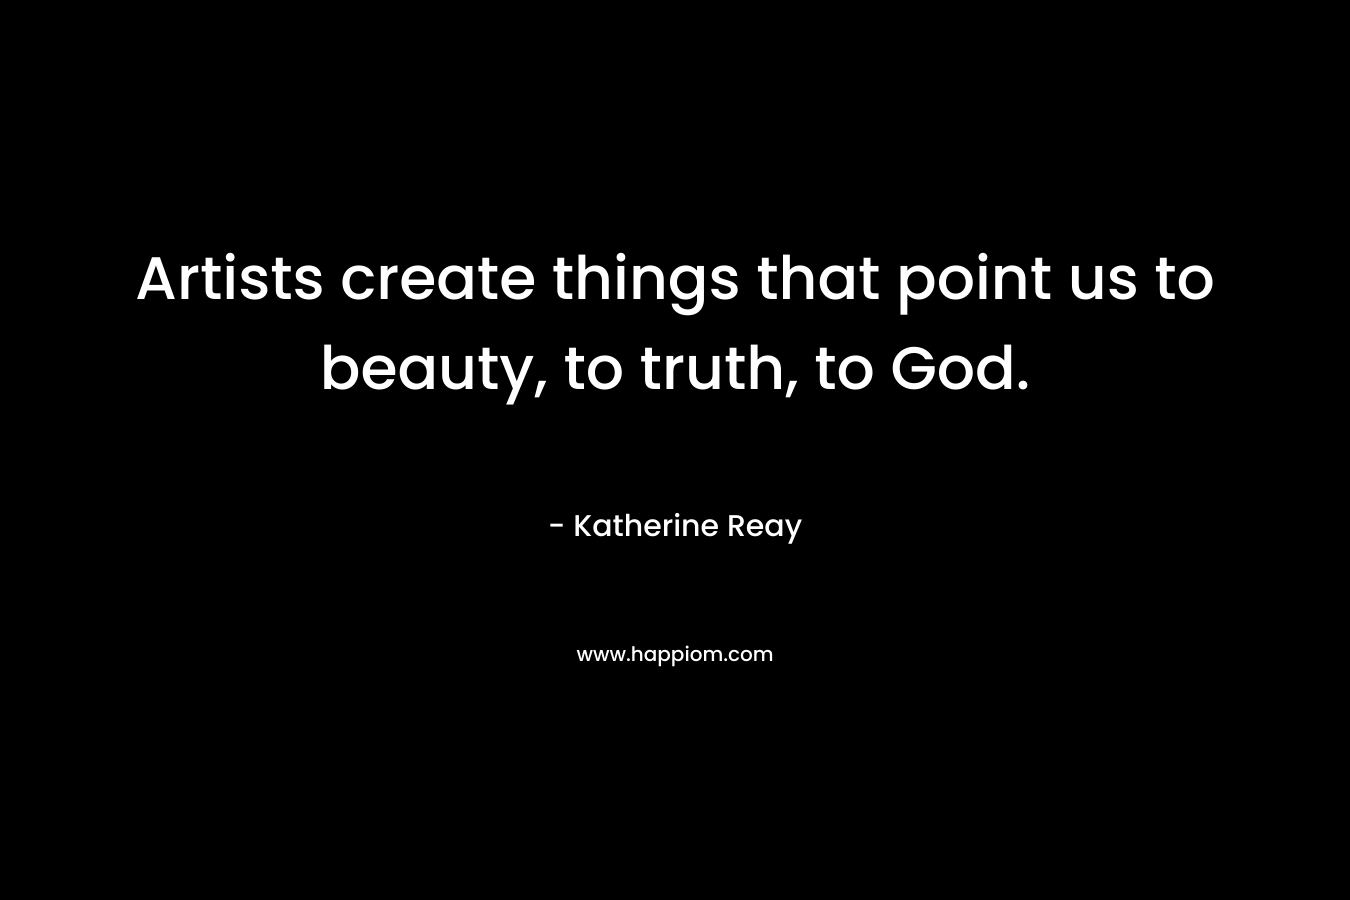 Artists create things that point us to beauty, to truth, to God. – Katherine Reay